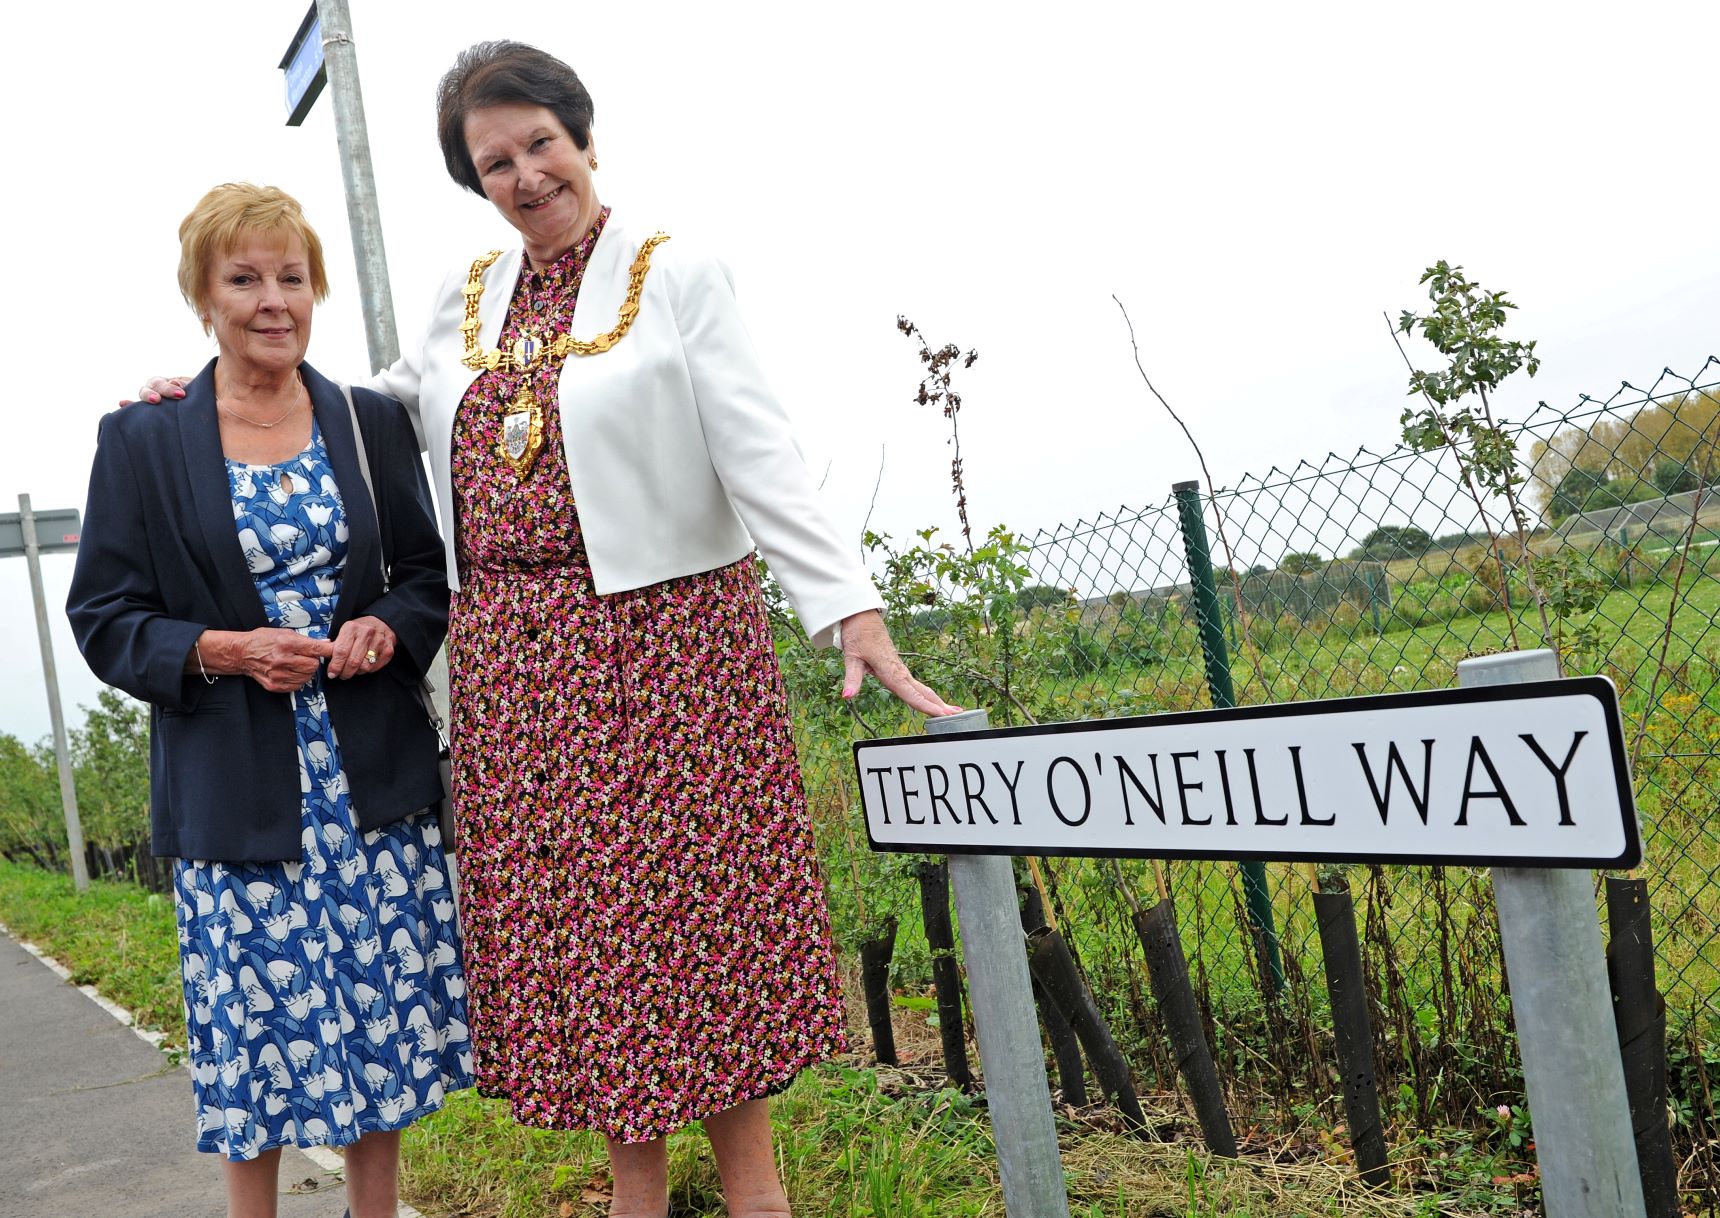 The Terry O'Neill Way launch